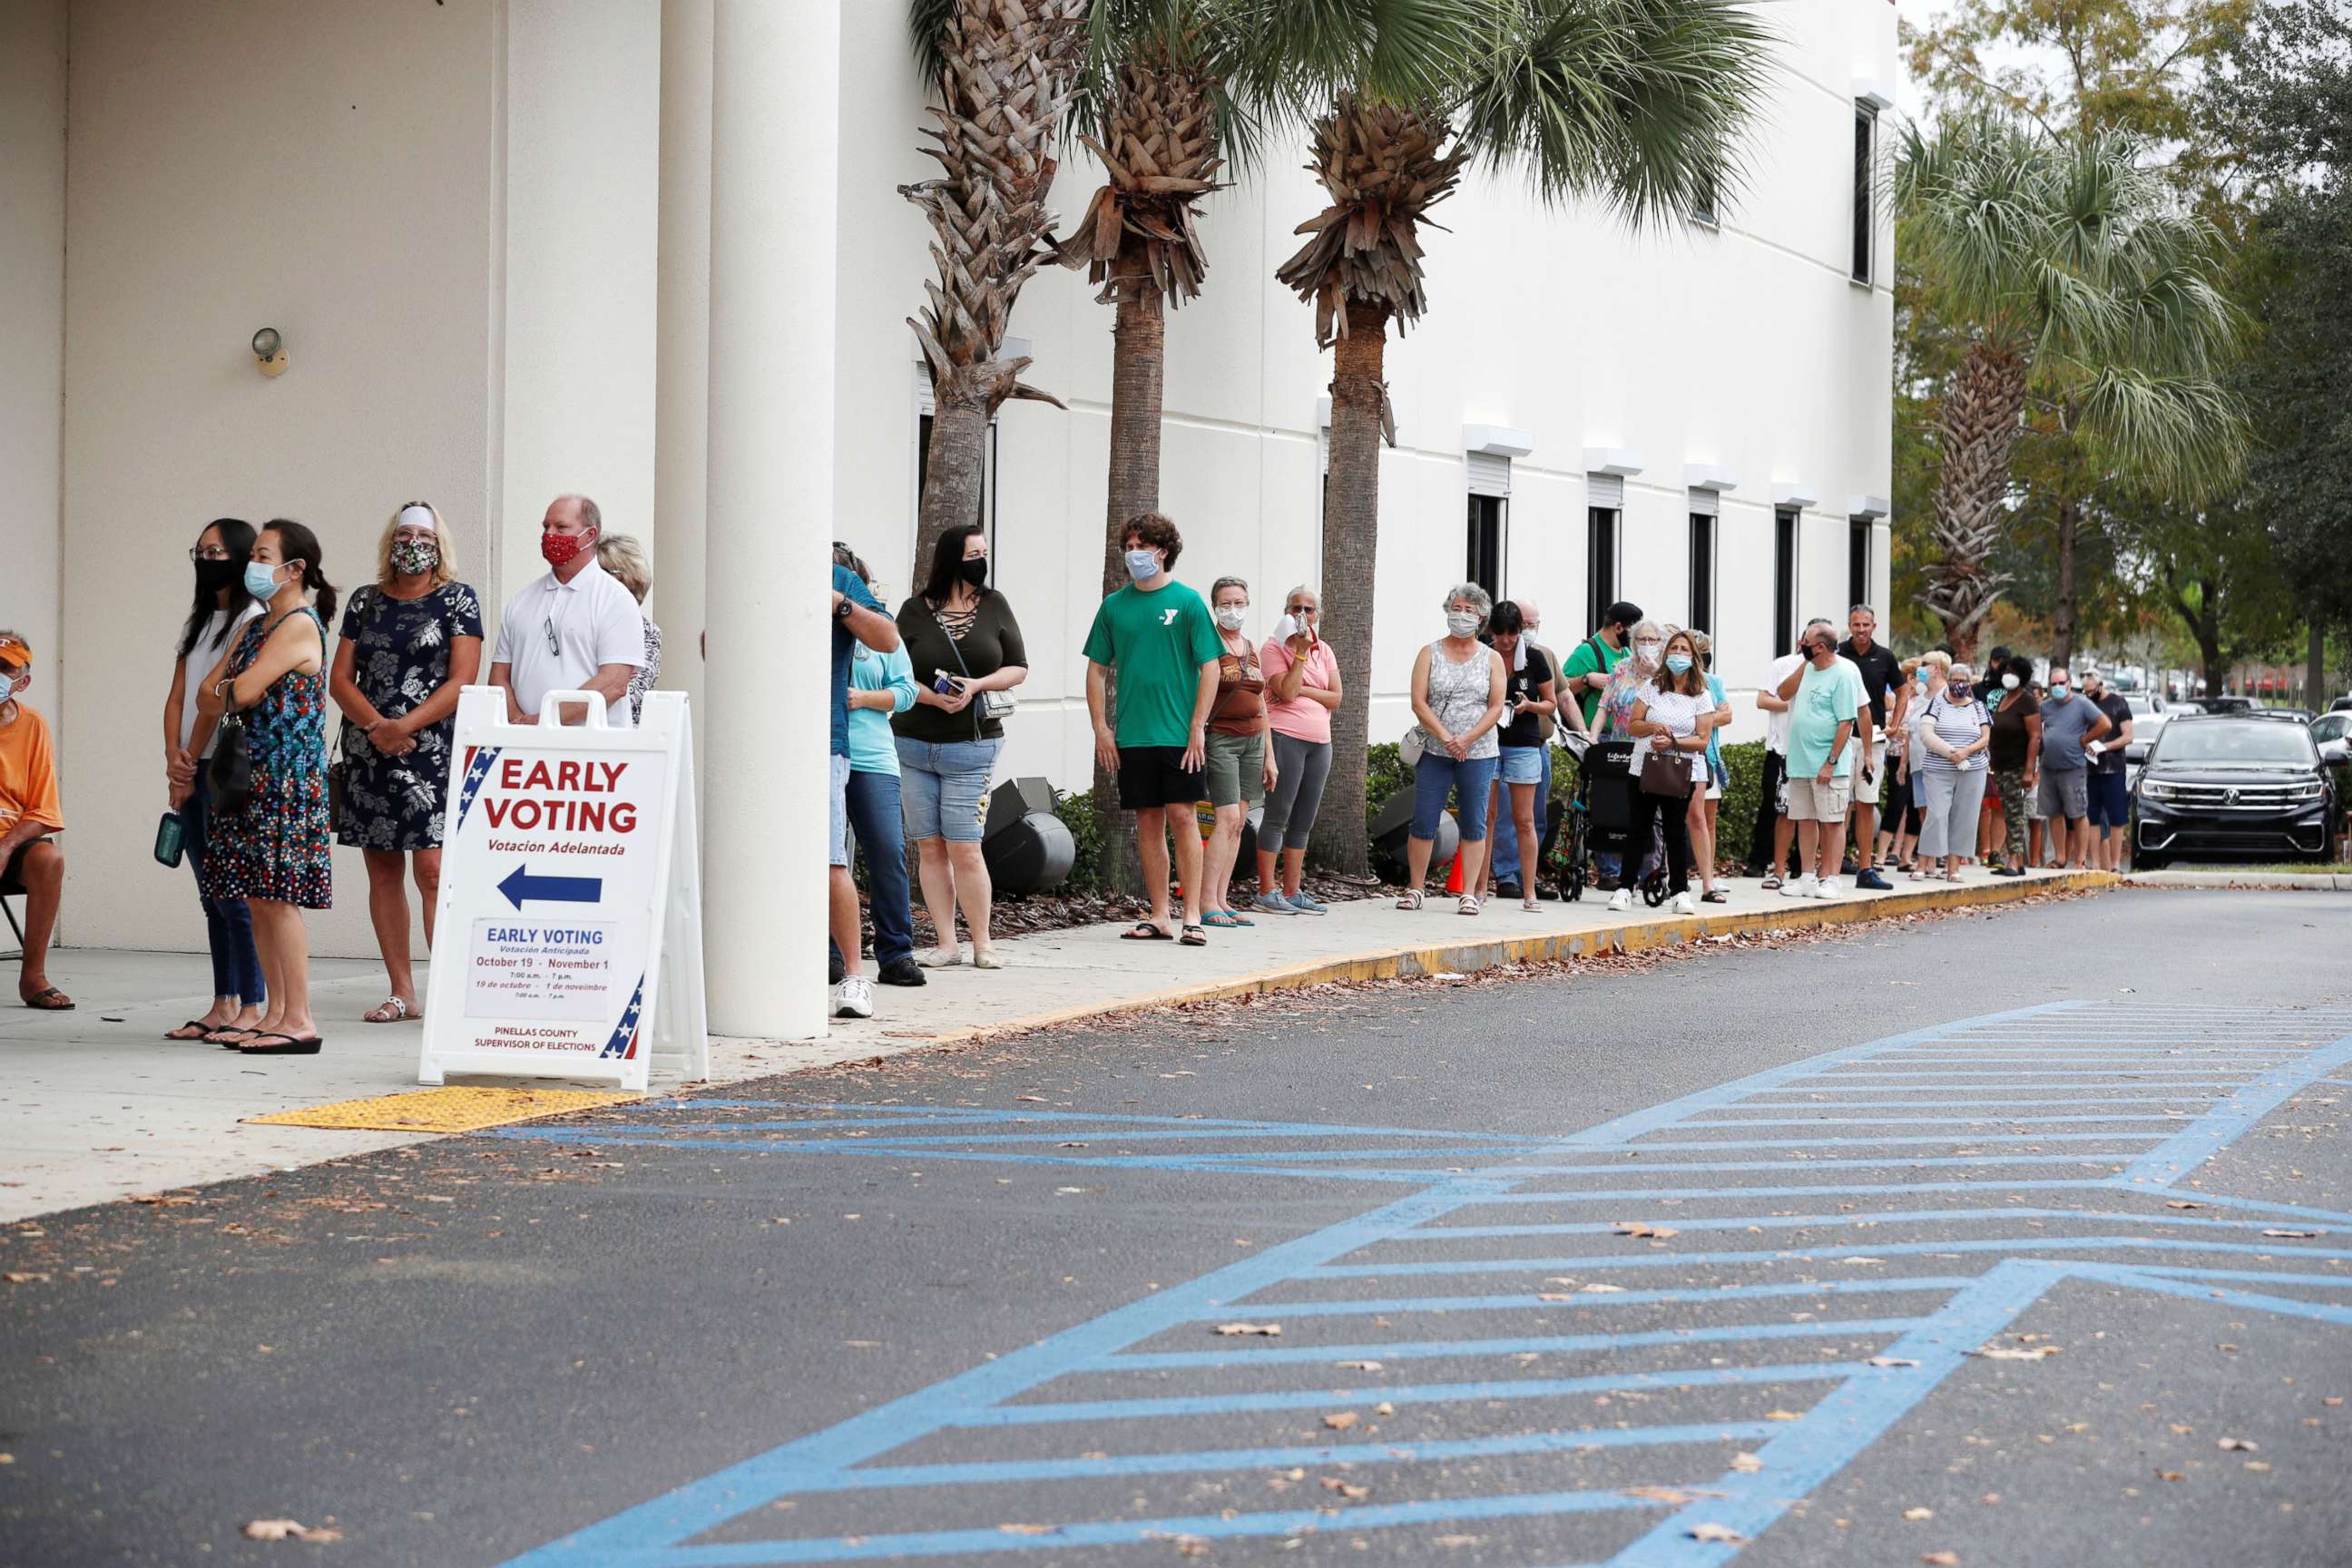 PHOTO: Voters line up at the Supervisor of Elections Office polling station as early voting begins in Pinellas County ahead of the election in Largo, Fla., Oct. 21, 2020.